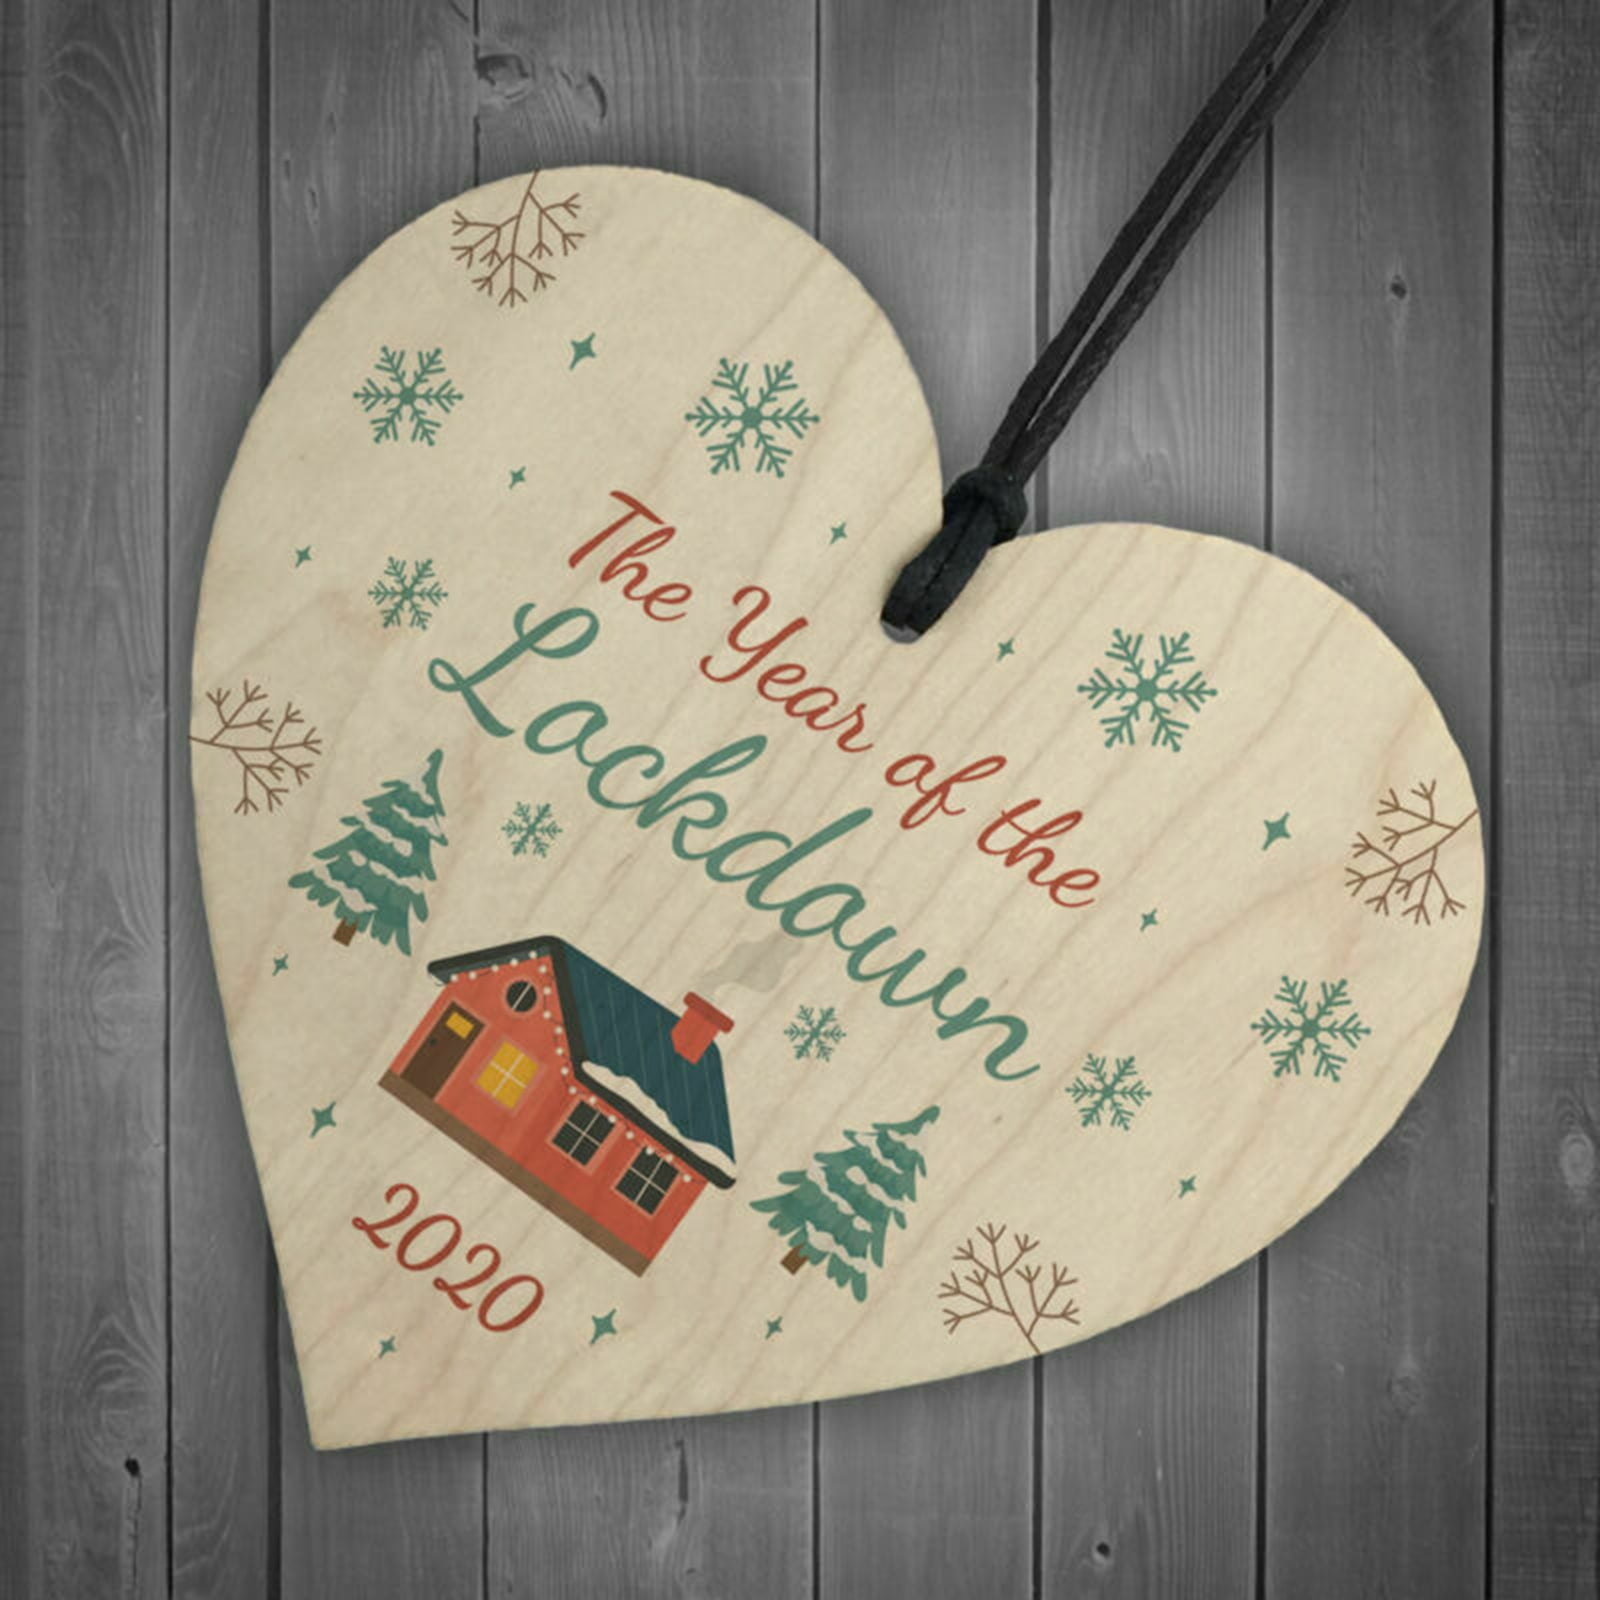 Details about   Wood Christmas Tree Decor Heart Hanging Bauble The year of the Lockdown Gift 